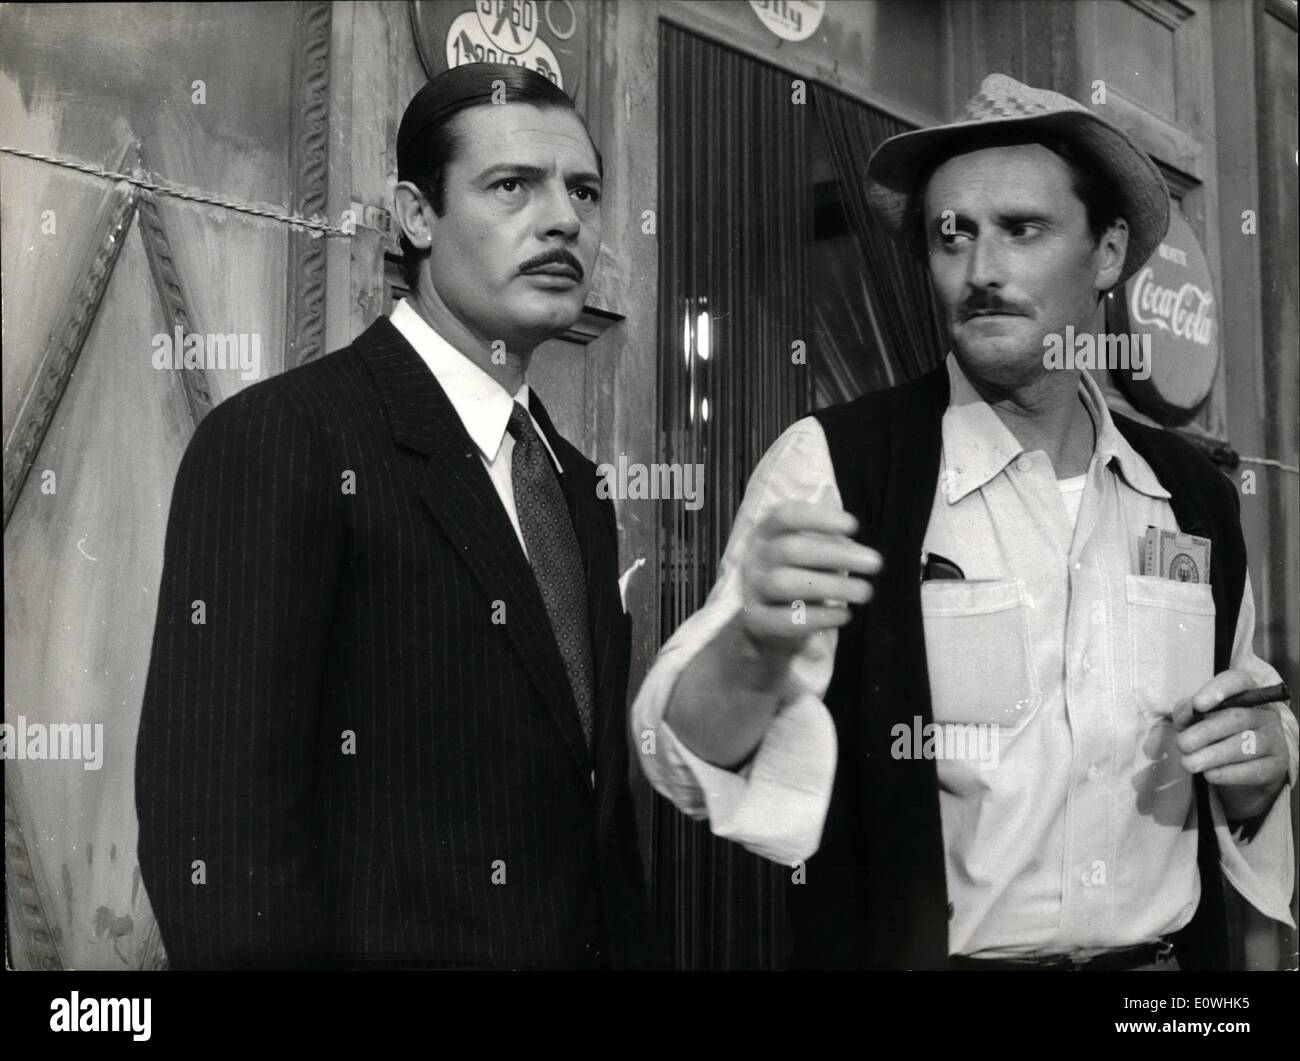 Feb. 02, 1963 - Italian actor Marcello Mastroianni is in lists for ''Oscar prize 1962'' for his beautiful role in the film ''Diversion all'' Italian'' (Italian divorce) directed by Pictor general. photo shows Actor Marcello Mastroianni and director Pietro Germi in sicity isle. Stock Photo